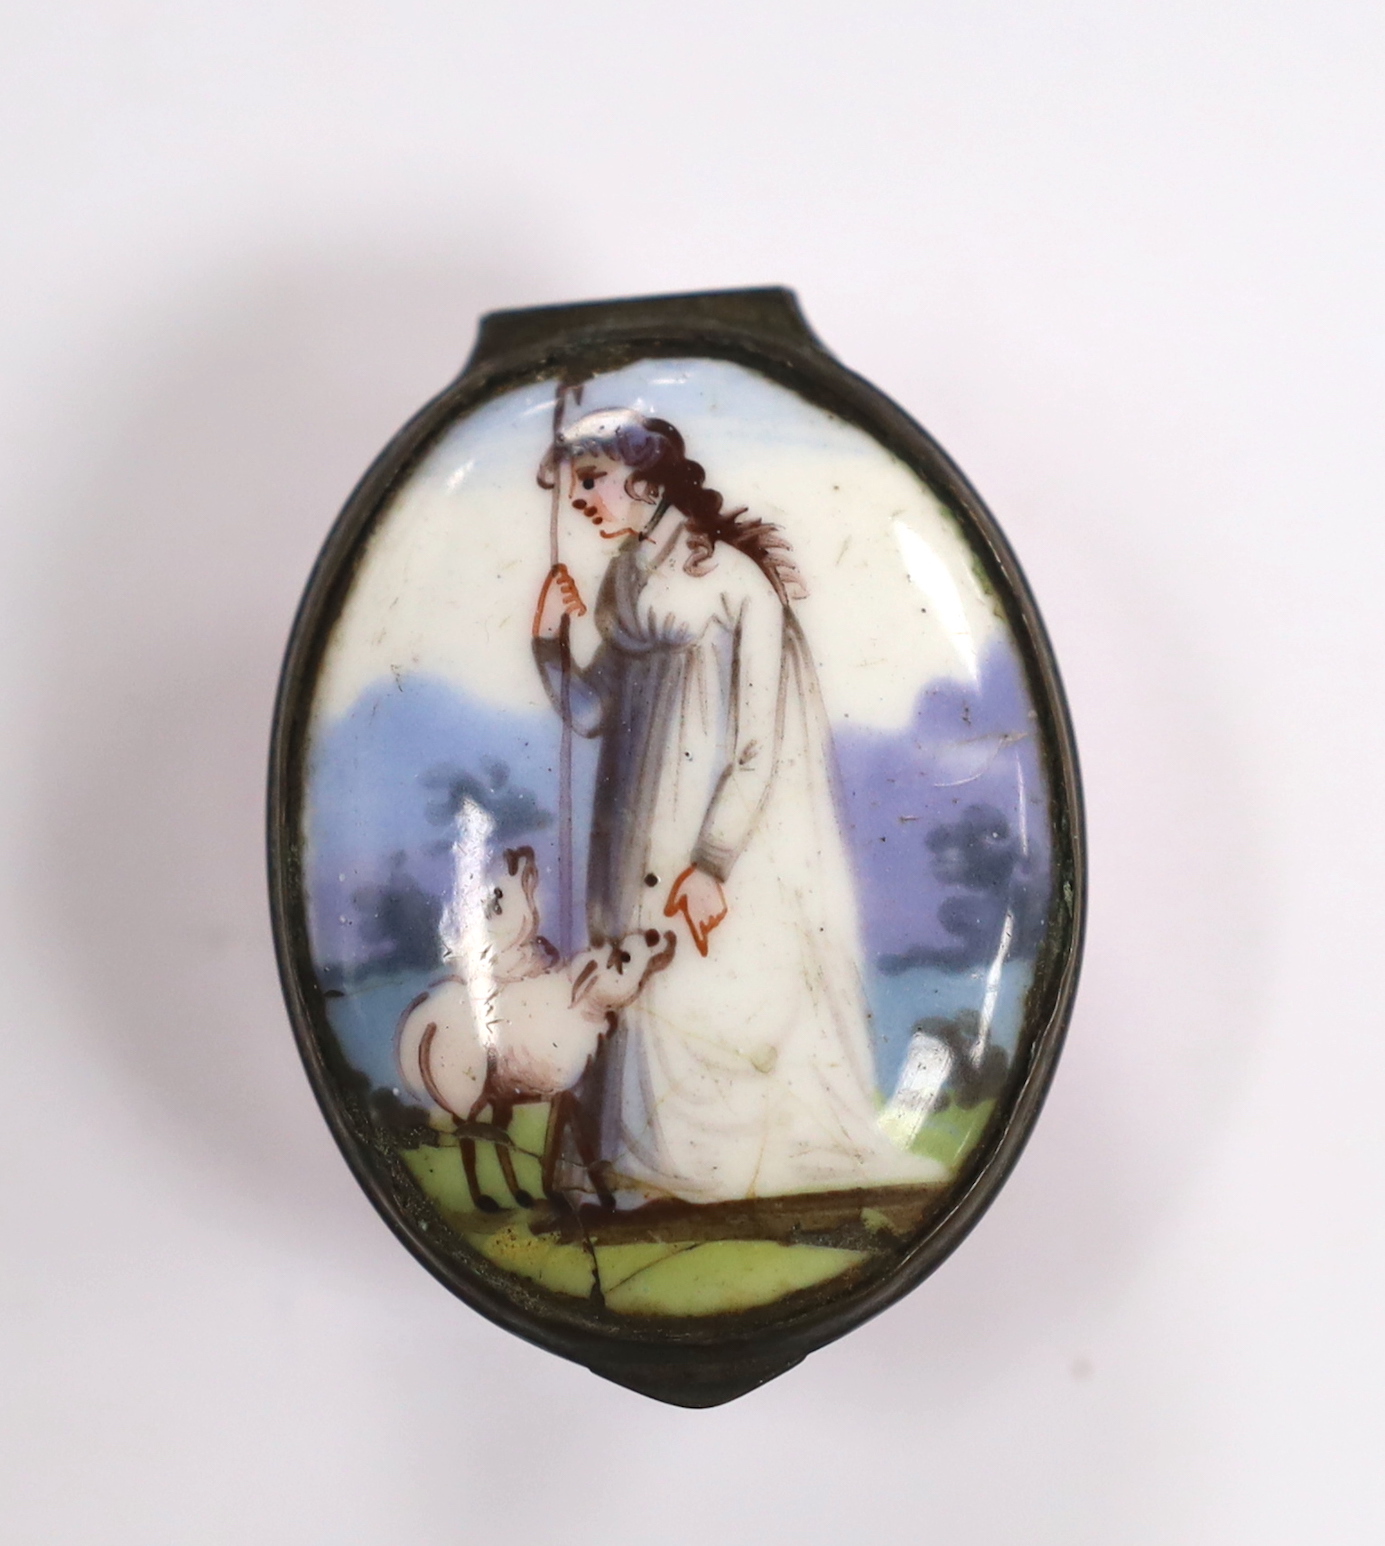 A late 18th century / early 19th century South Staffordshire enamel box of a shepherdess and sheep, 5cm deep